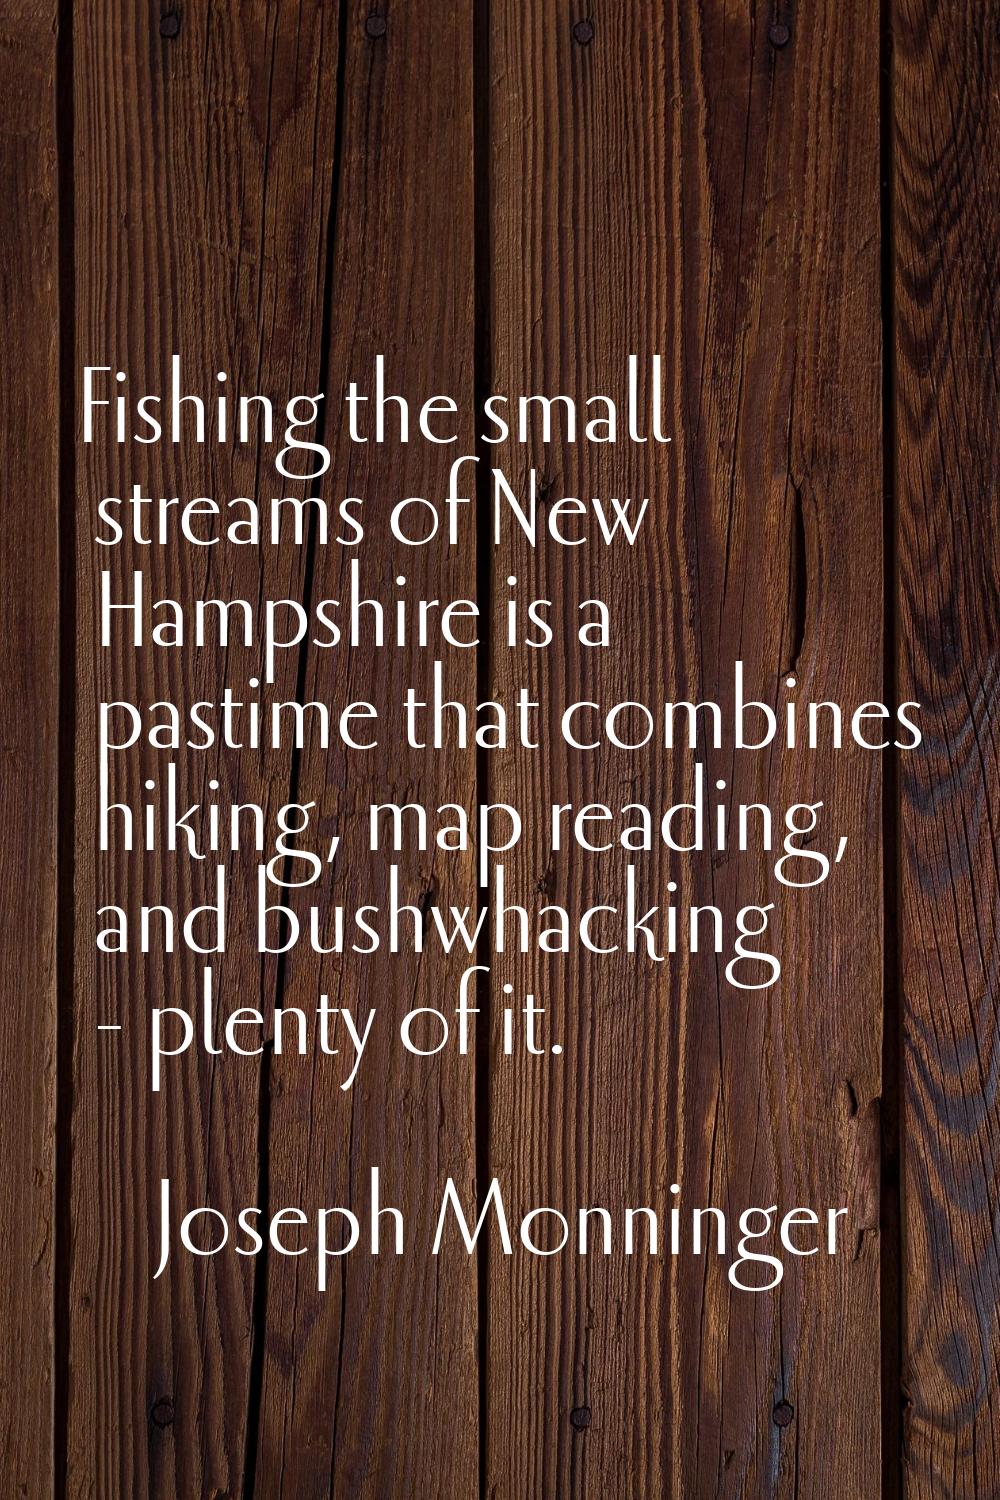 Fishing the small streams of New Hampshire is a pastime that combines hiking, map reading, and bush